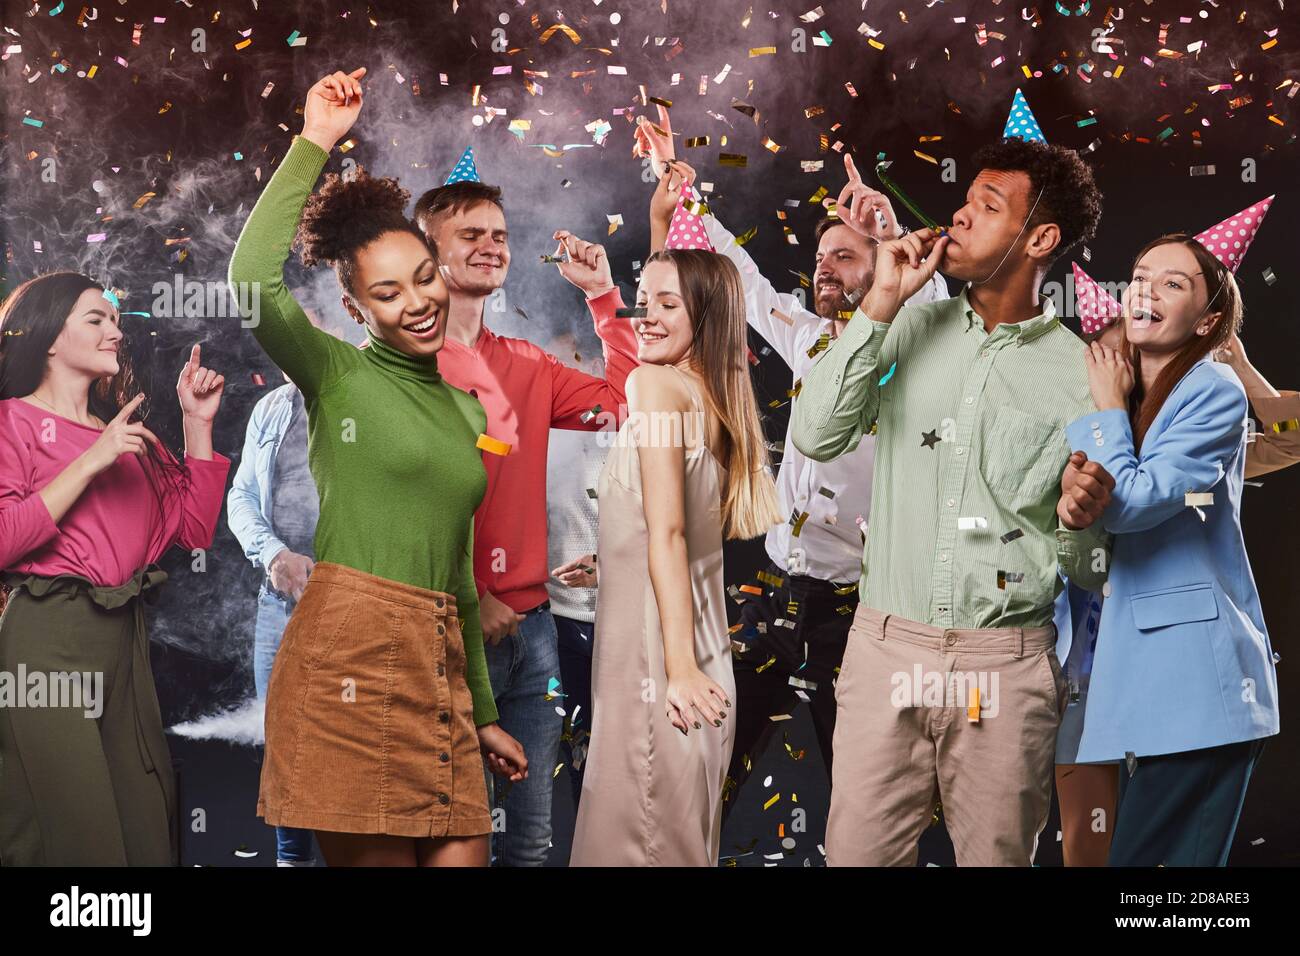 Celebrating holiday with friends. Group of young happy multiracial people dancing and having fun, confetti falling in the air Stock Photo